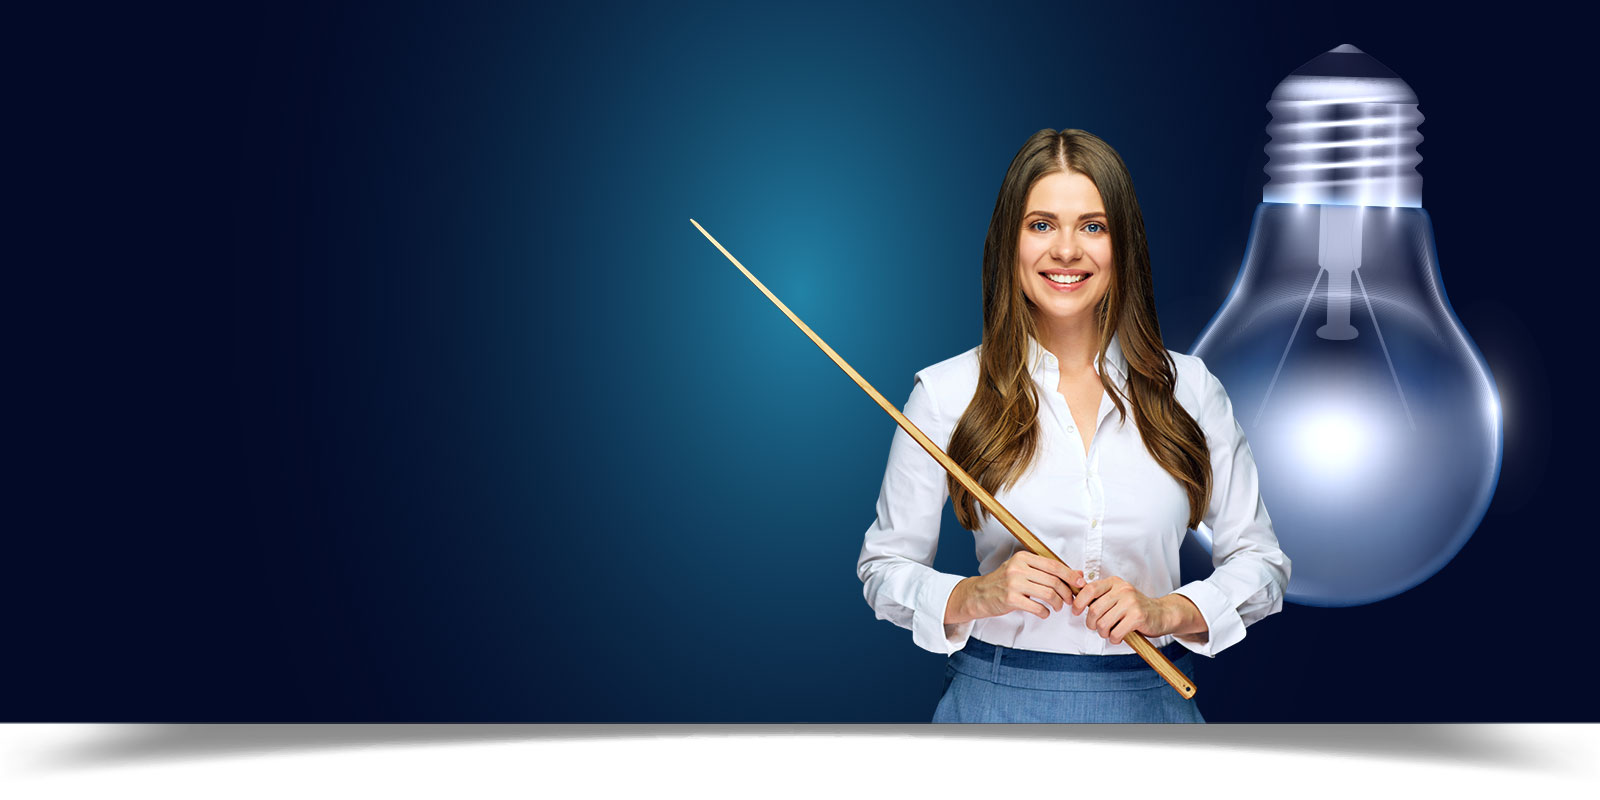 blue background with a female teacher pointing with a stick to the left, with a light bulb behind her.